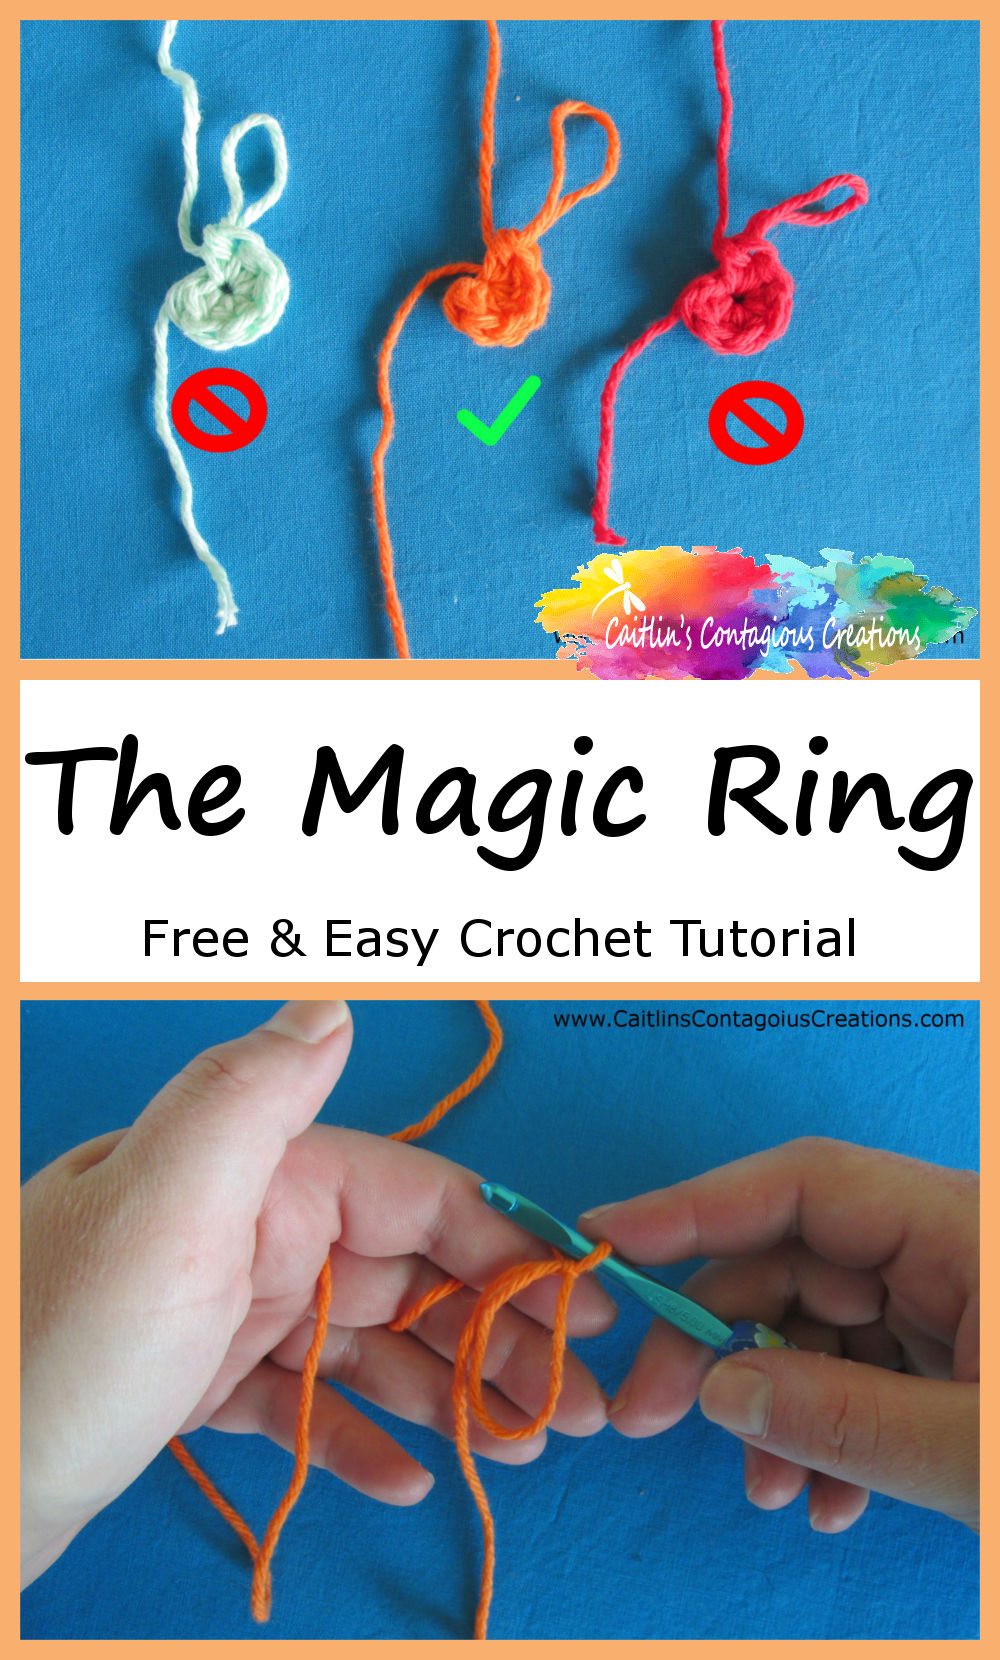 photos depicting advantage of magic ring in starting crochet project in the round